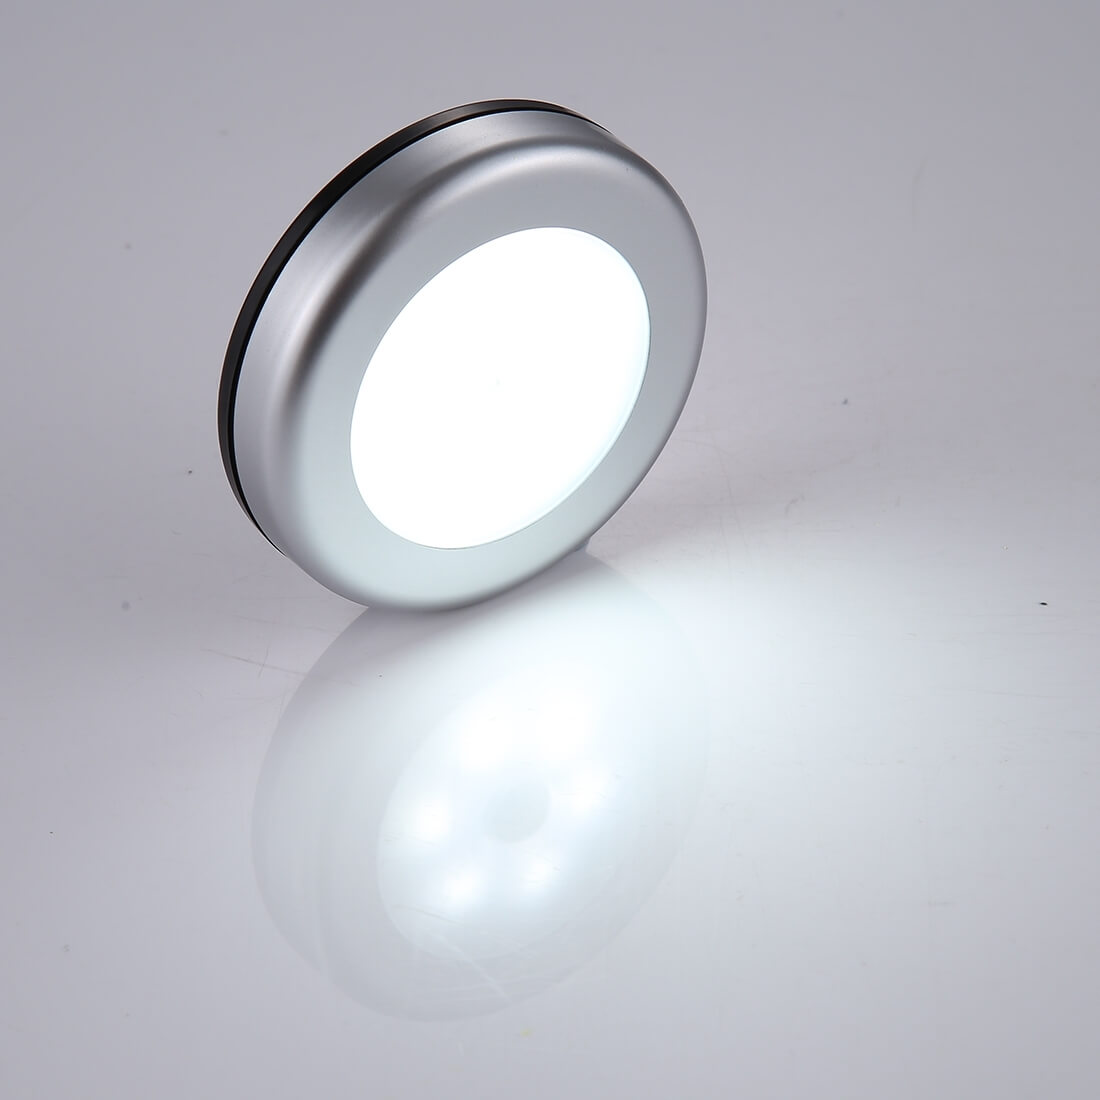 LED light with sensor, battery operated